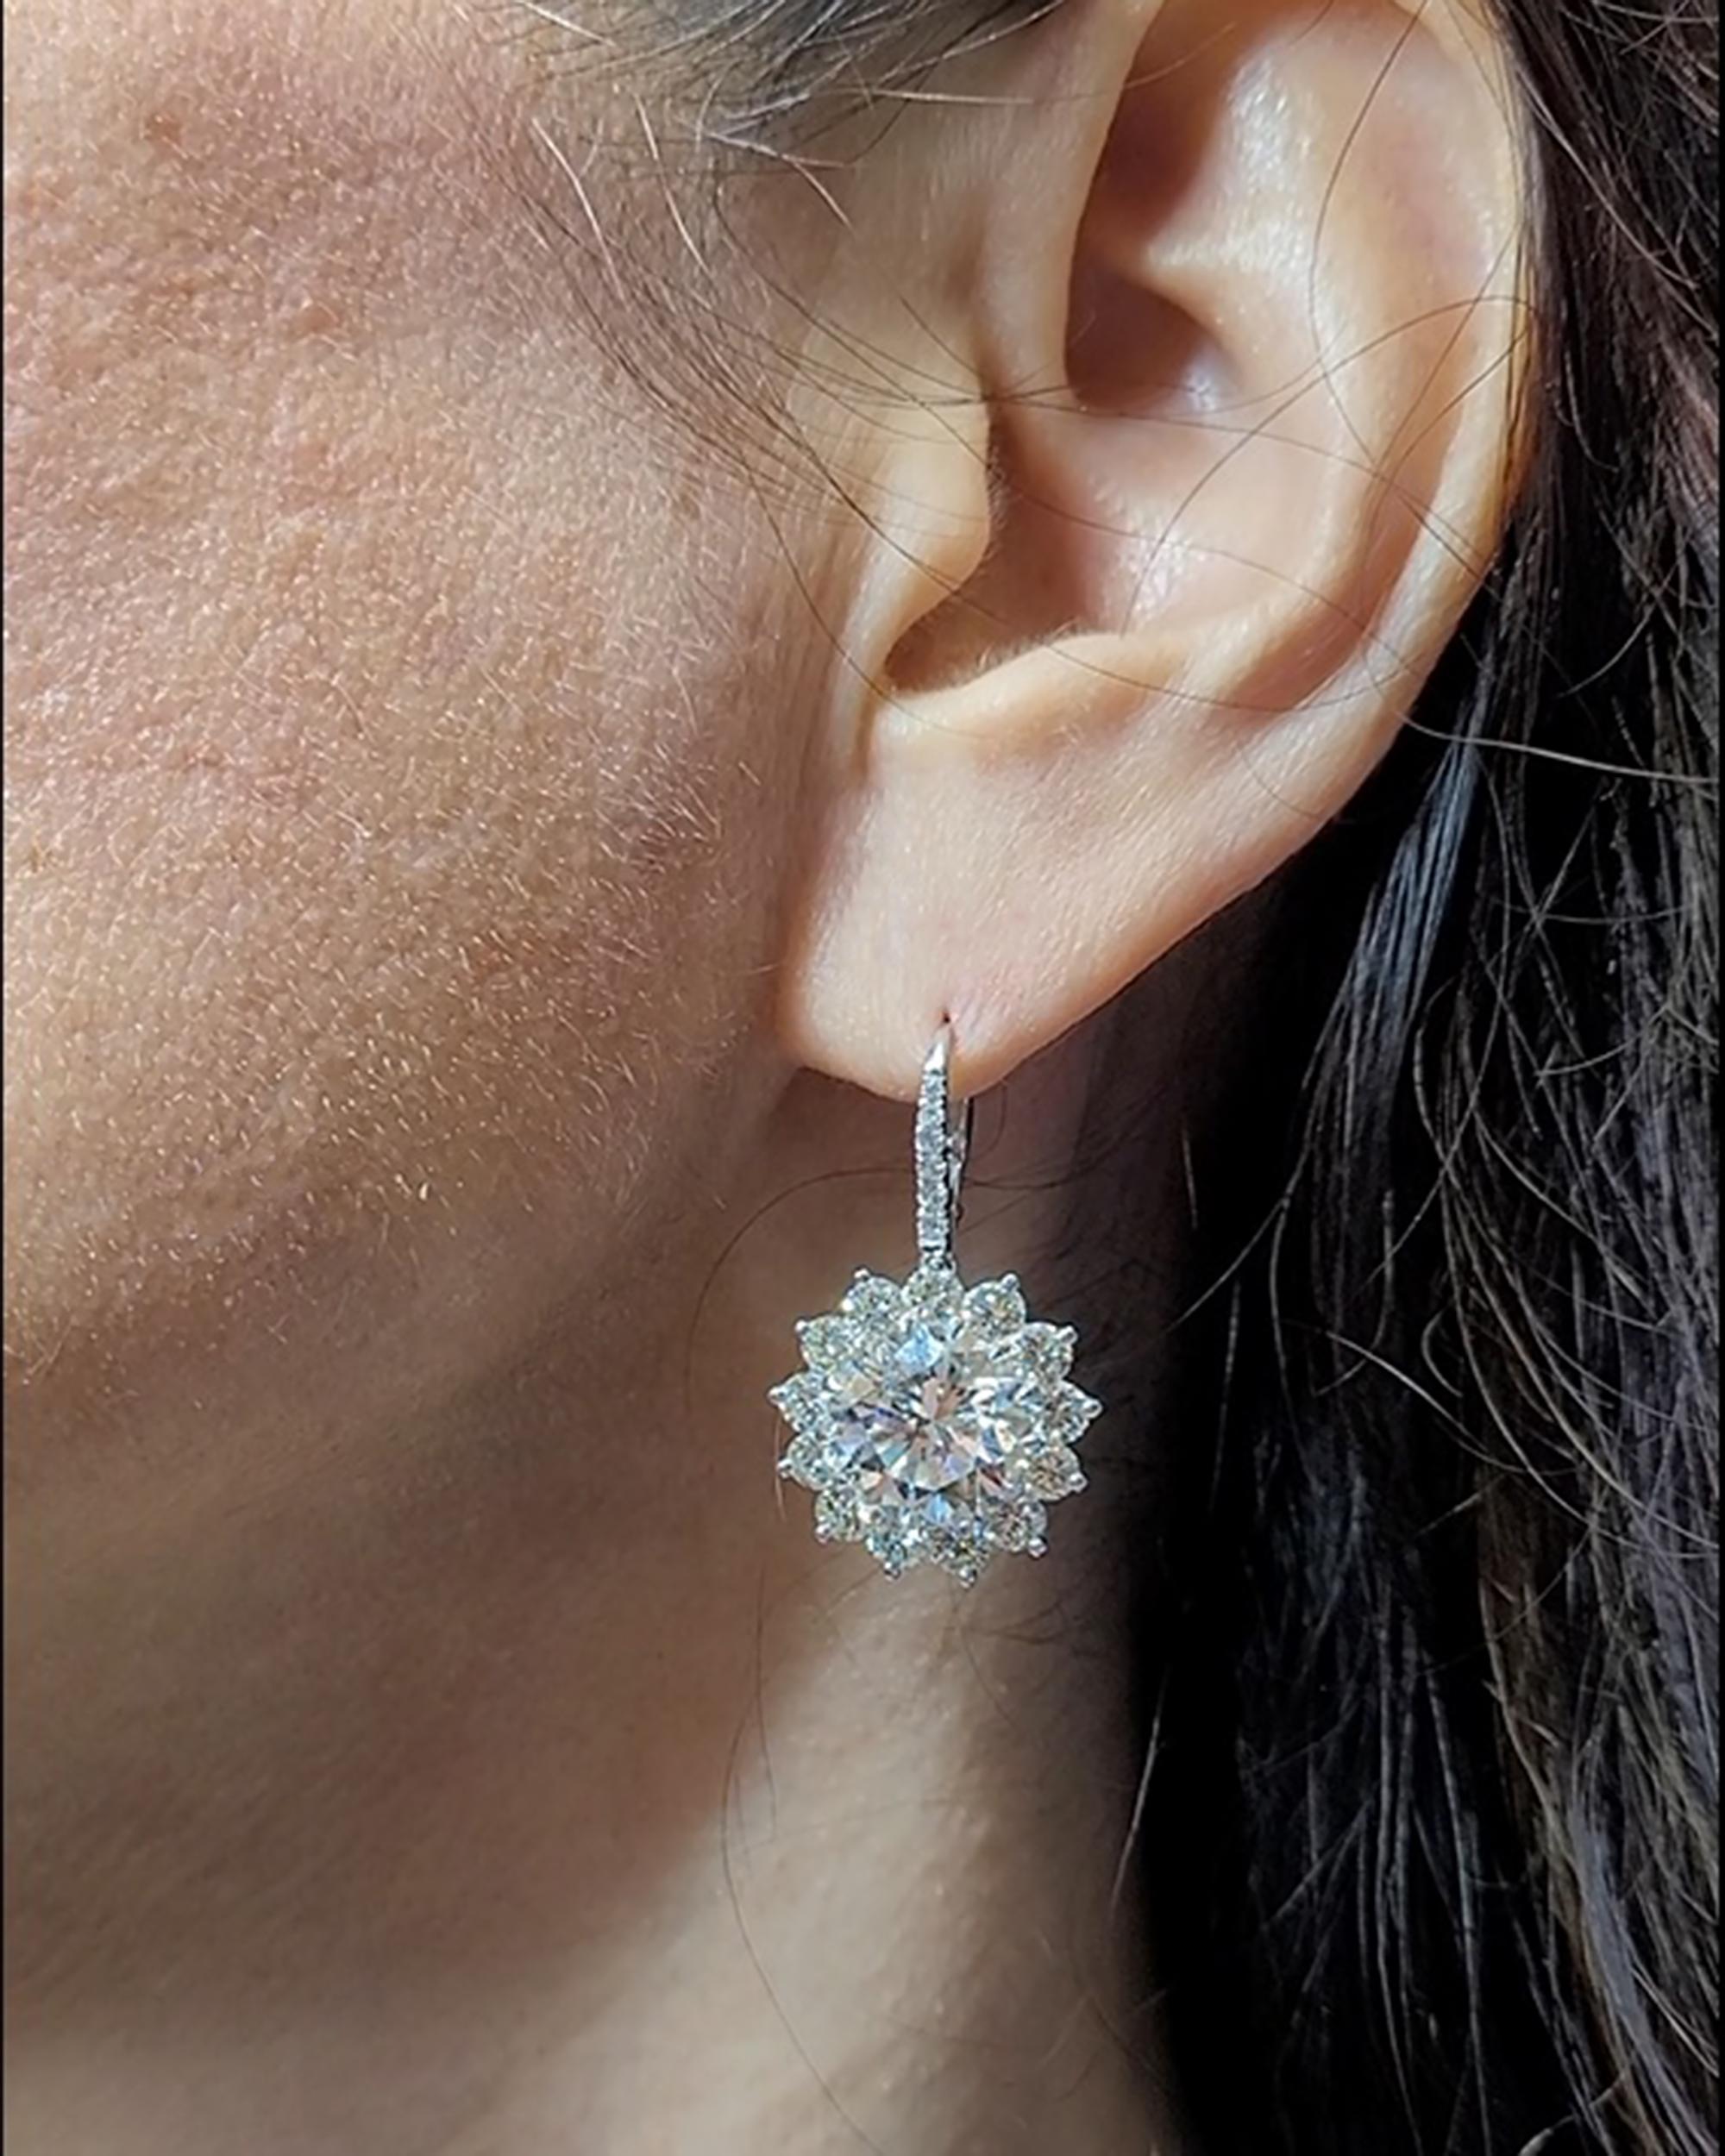 A pair of important earrings designed as a flower and mounted in platinum.
Comprising of two round diamonds in the center, certified by GIA stating that they are 5.76 carat J VS2 and 5.88 carat I VVS1.
26 round diamonds around the center stones